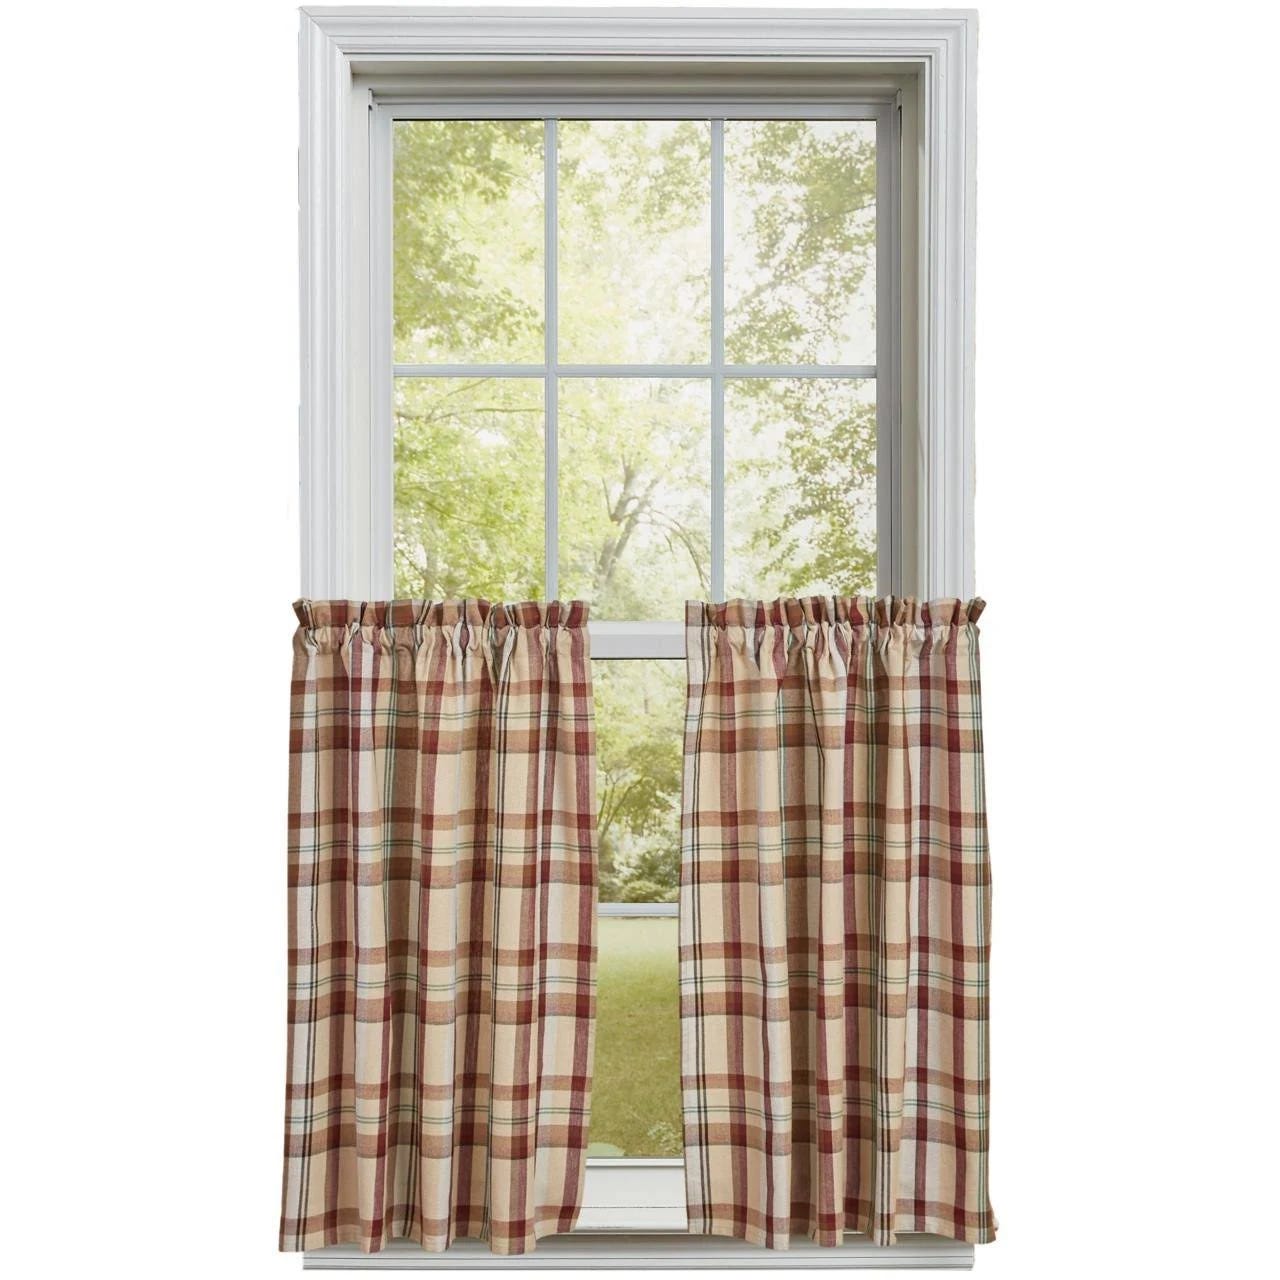 Rustic Plaid Tiered Curtains for Your Home Atmosphere | Image